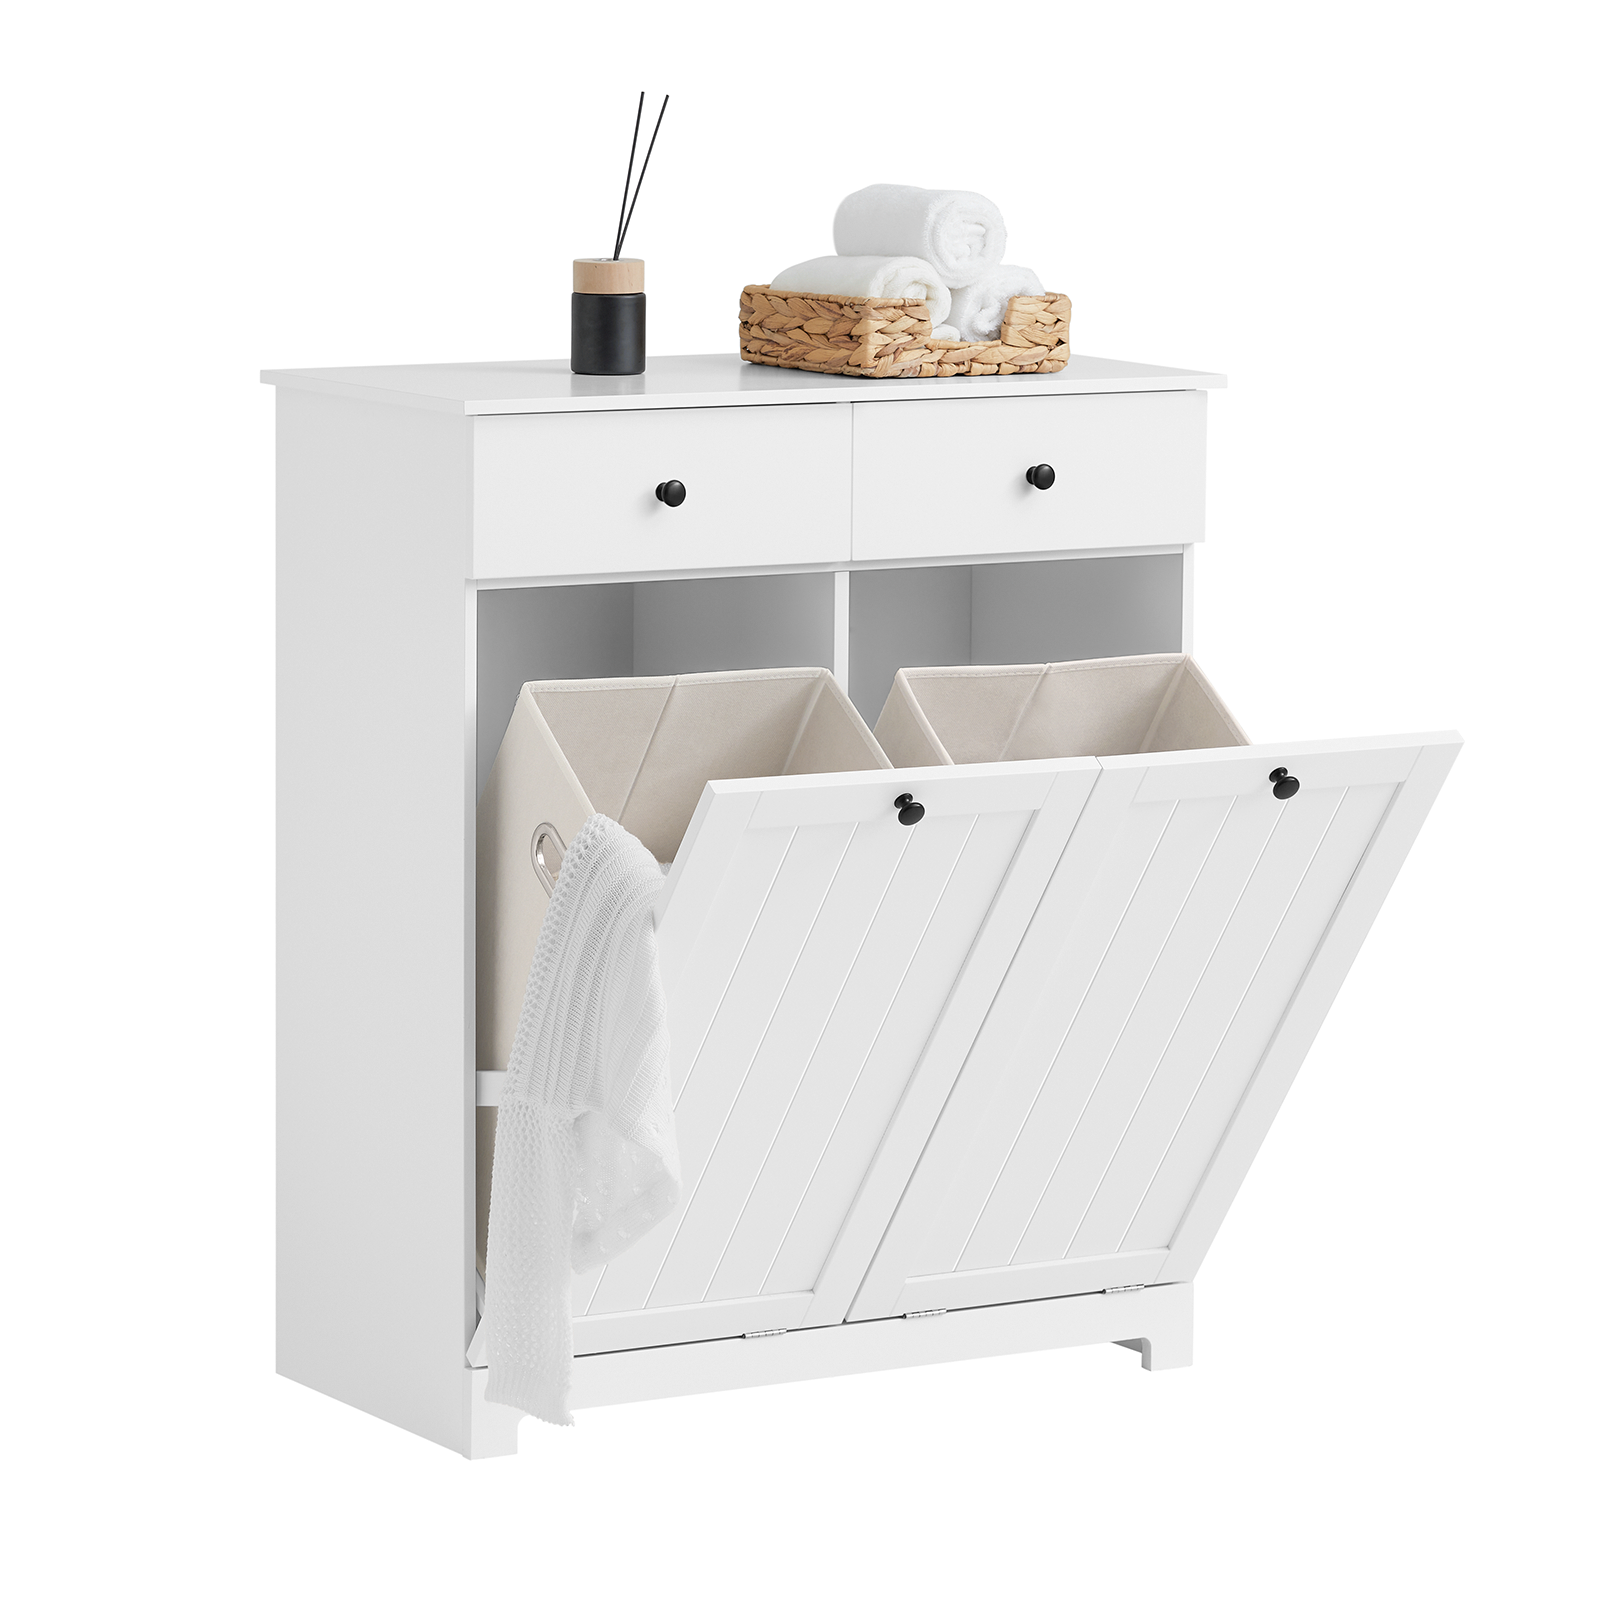 SoBuy BZR33-W, 2 Drawers 2 Doors Laundry Cabinet Laundry Chest with 2 Removable Laundry Baskets, Bathroom Cabinet